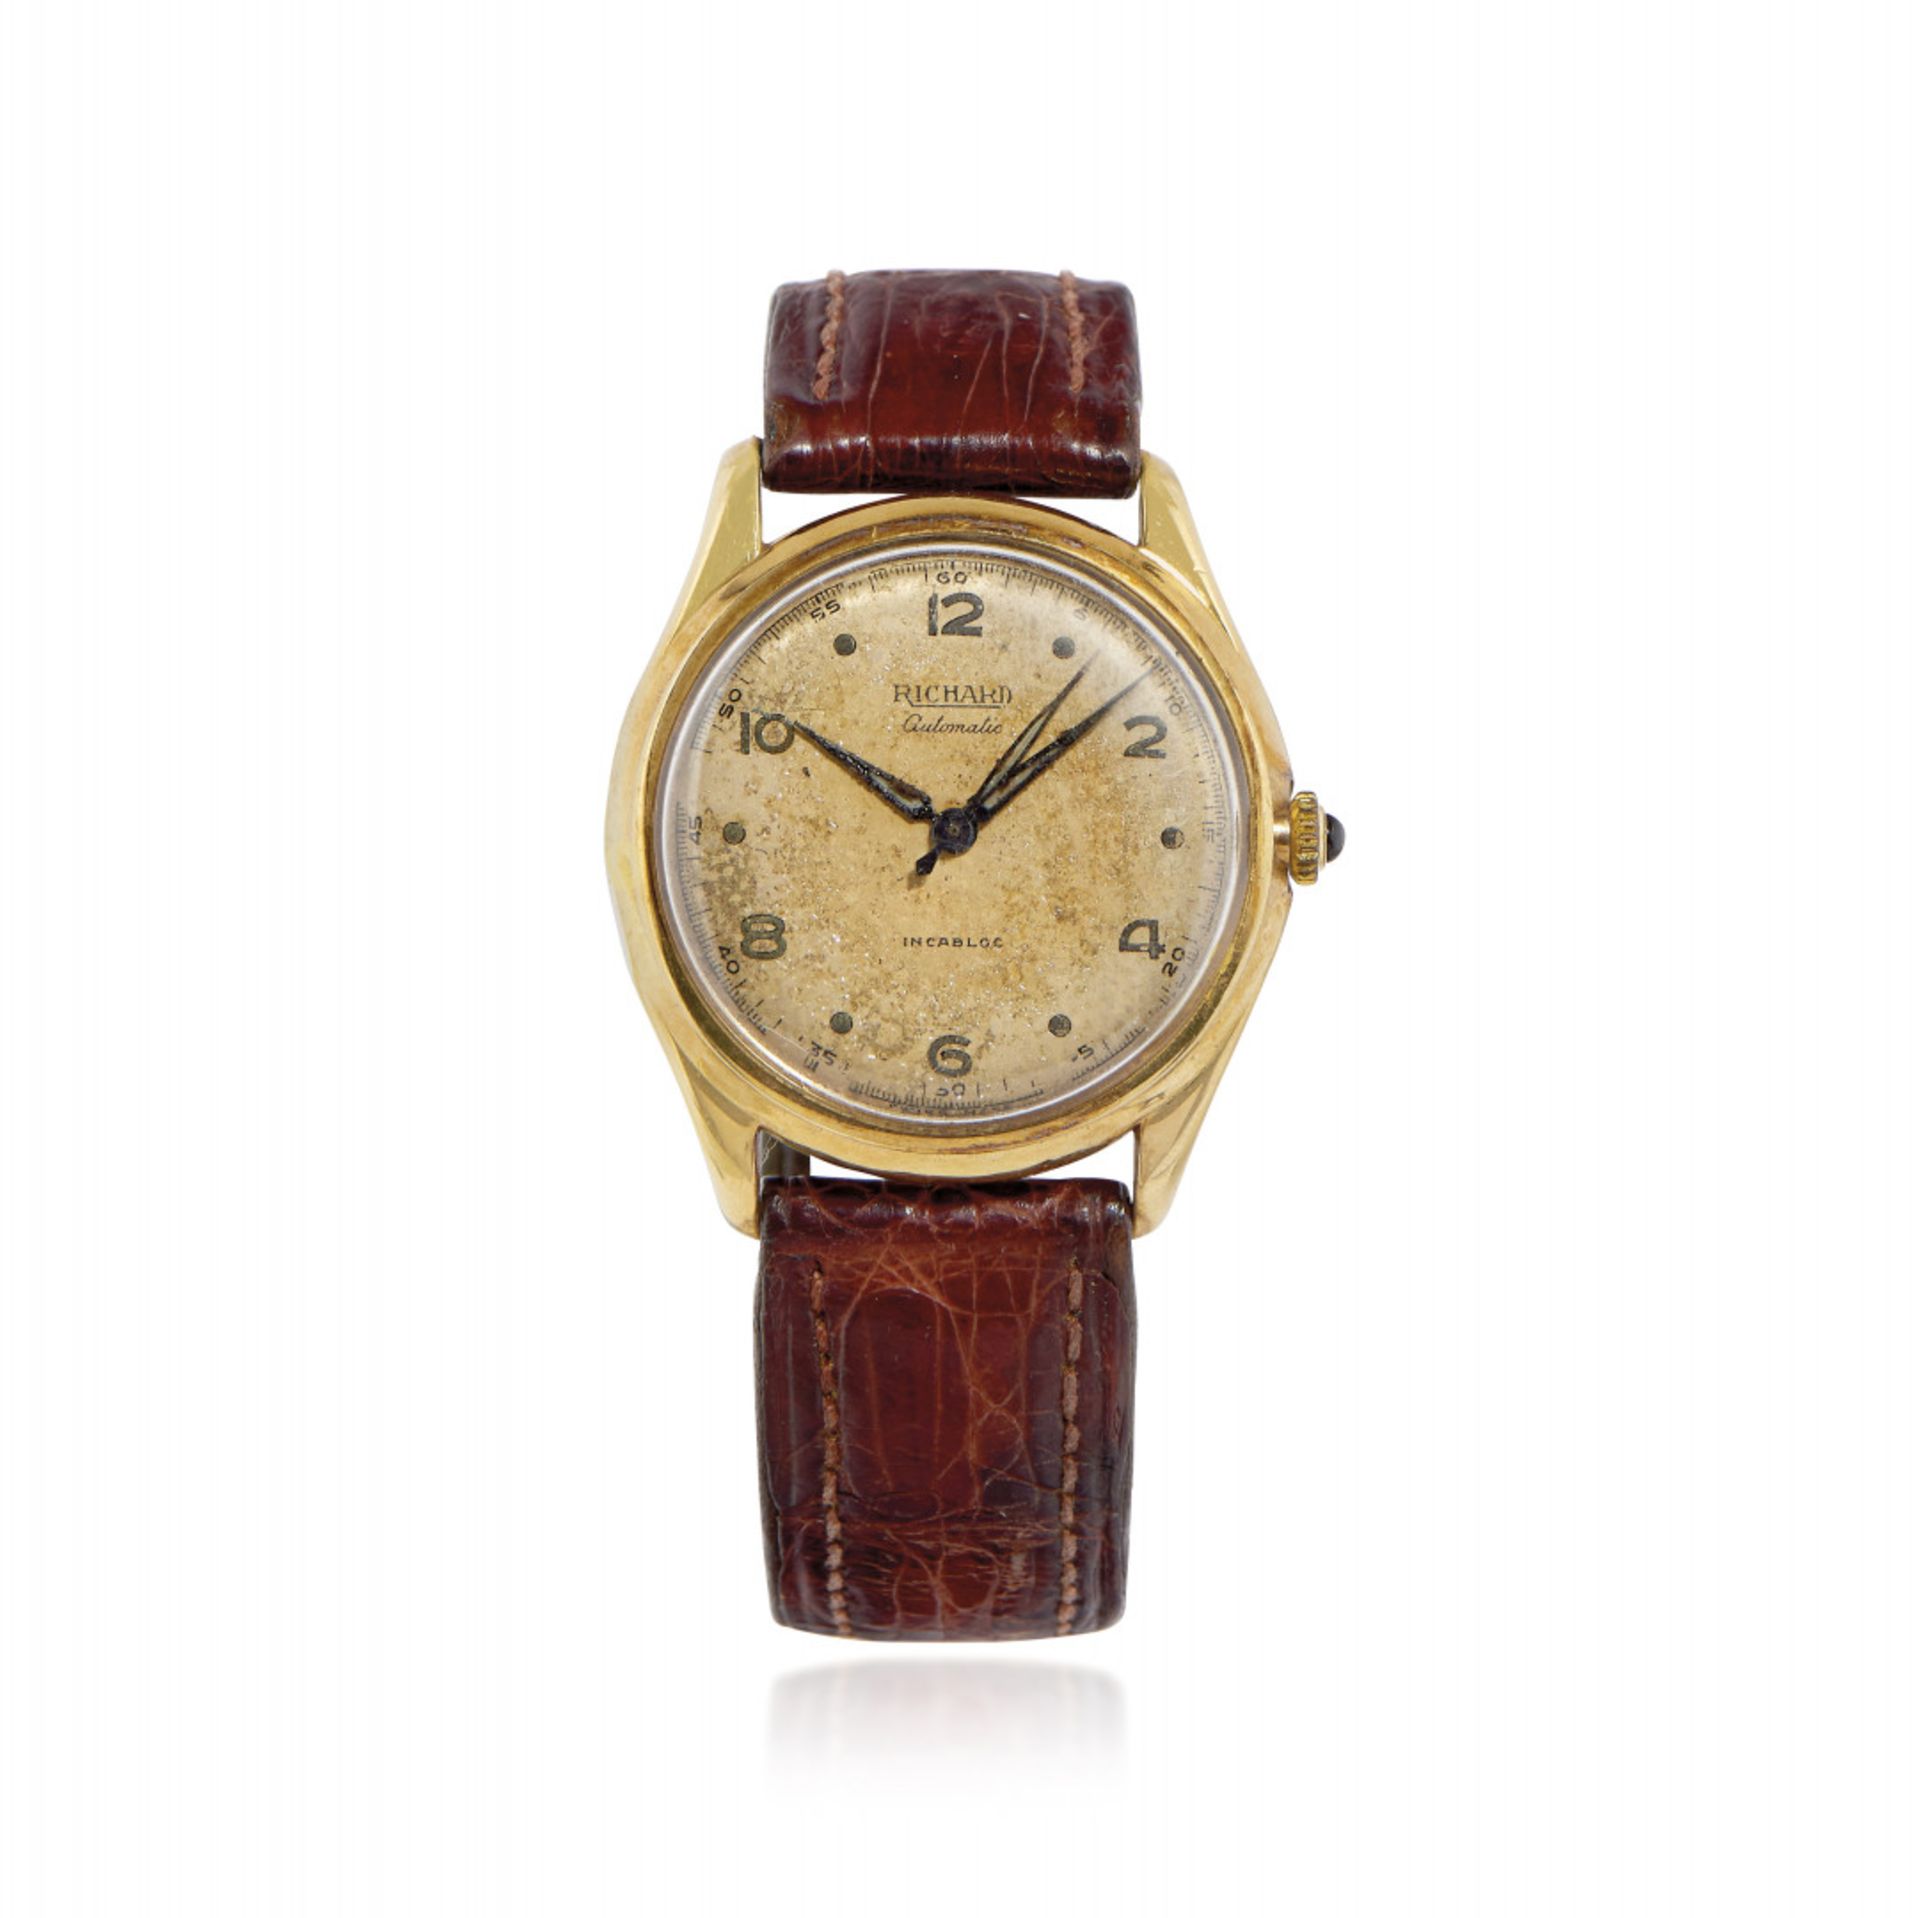 RICHARD AUTOMATIC IN GOLD, 50s